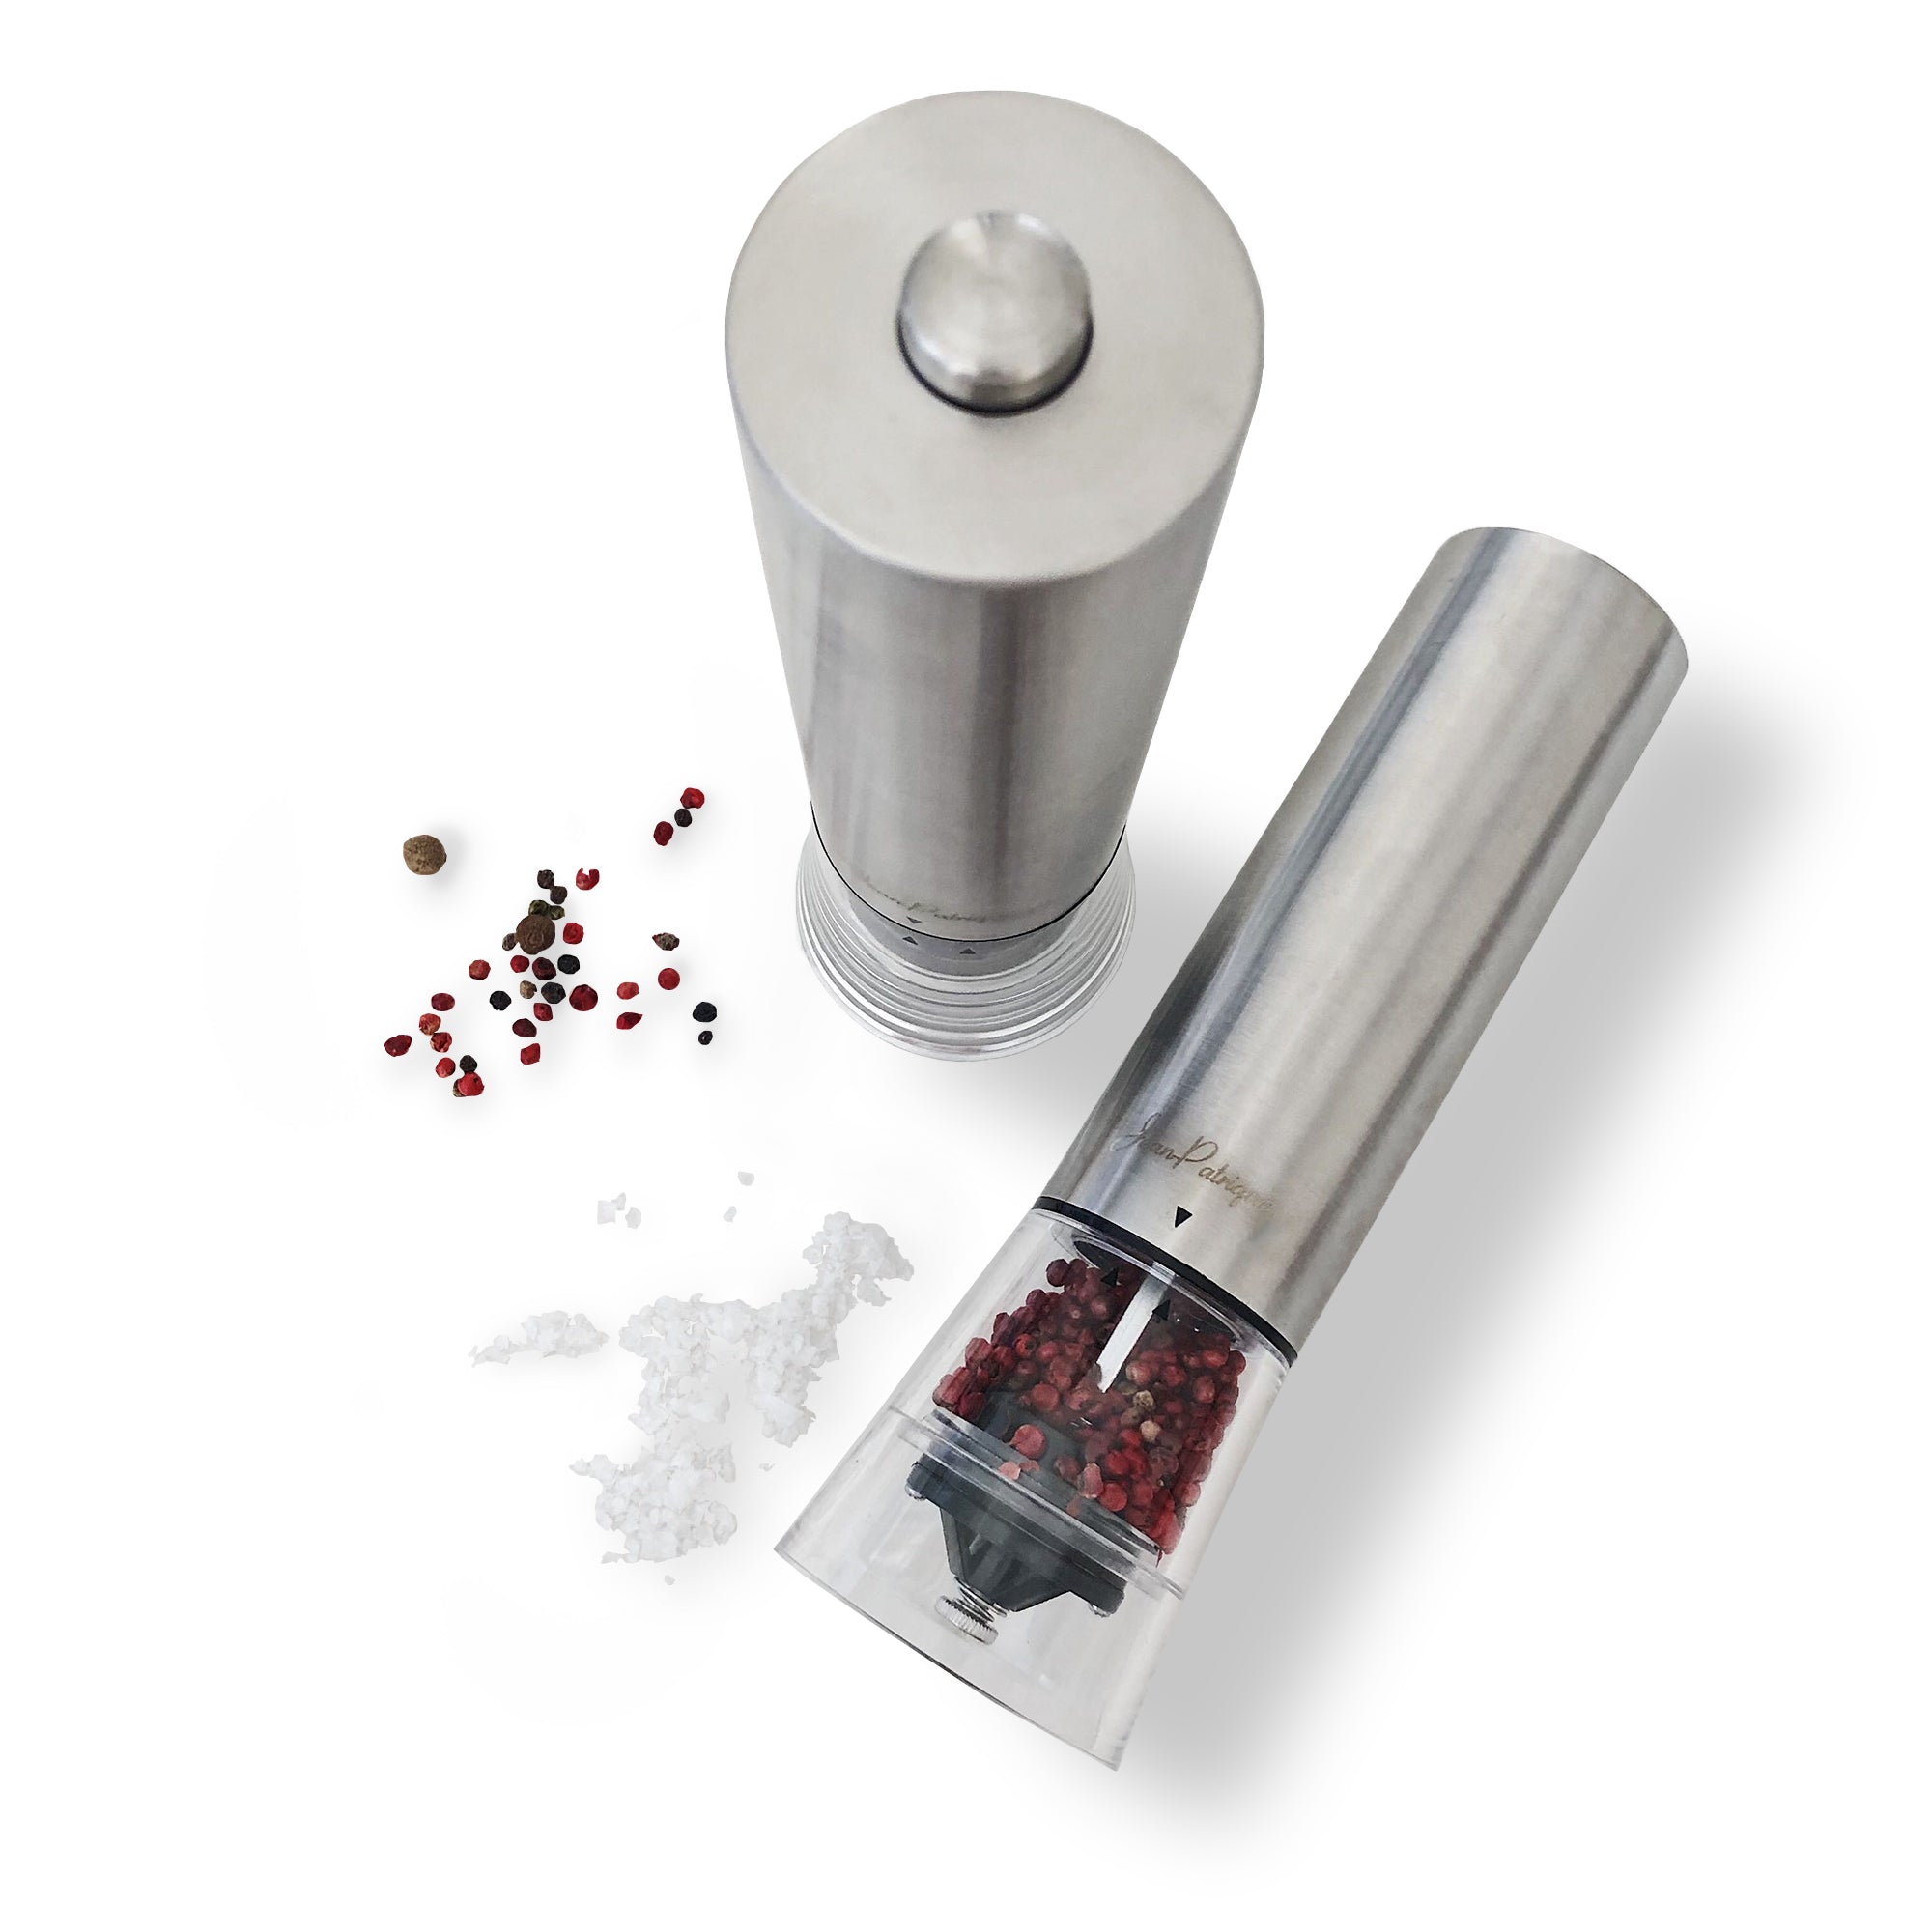 Aoibox 2-Pieces Stainless Steel Electric Automatic Pepper Mills Salt Grinder Silver